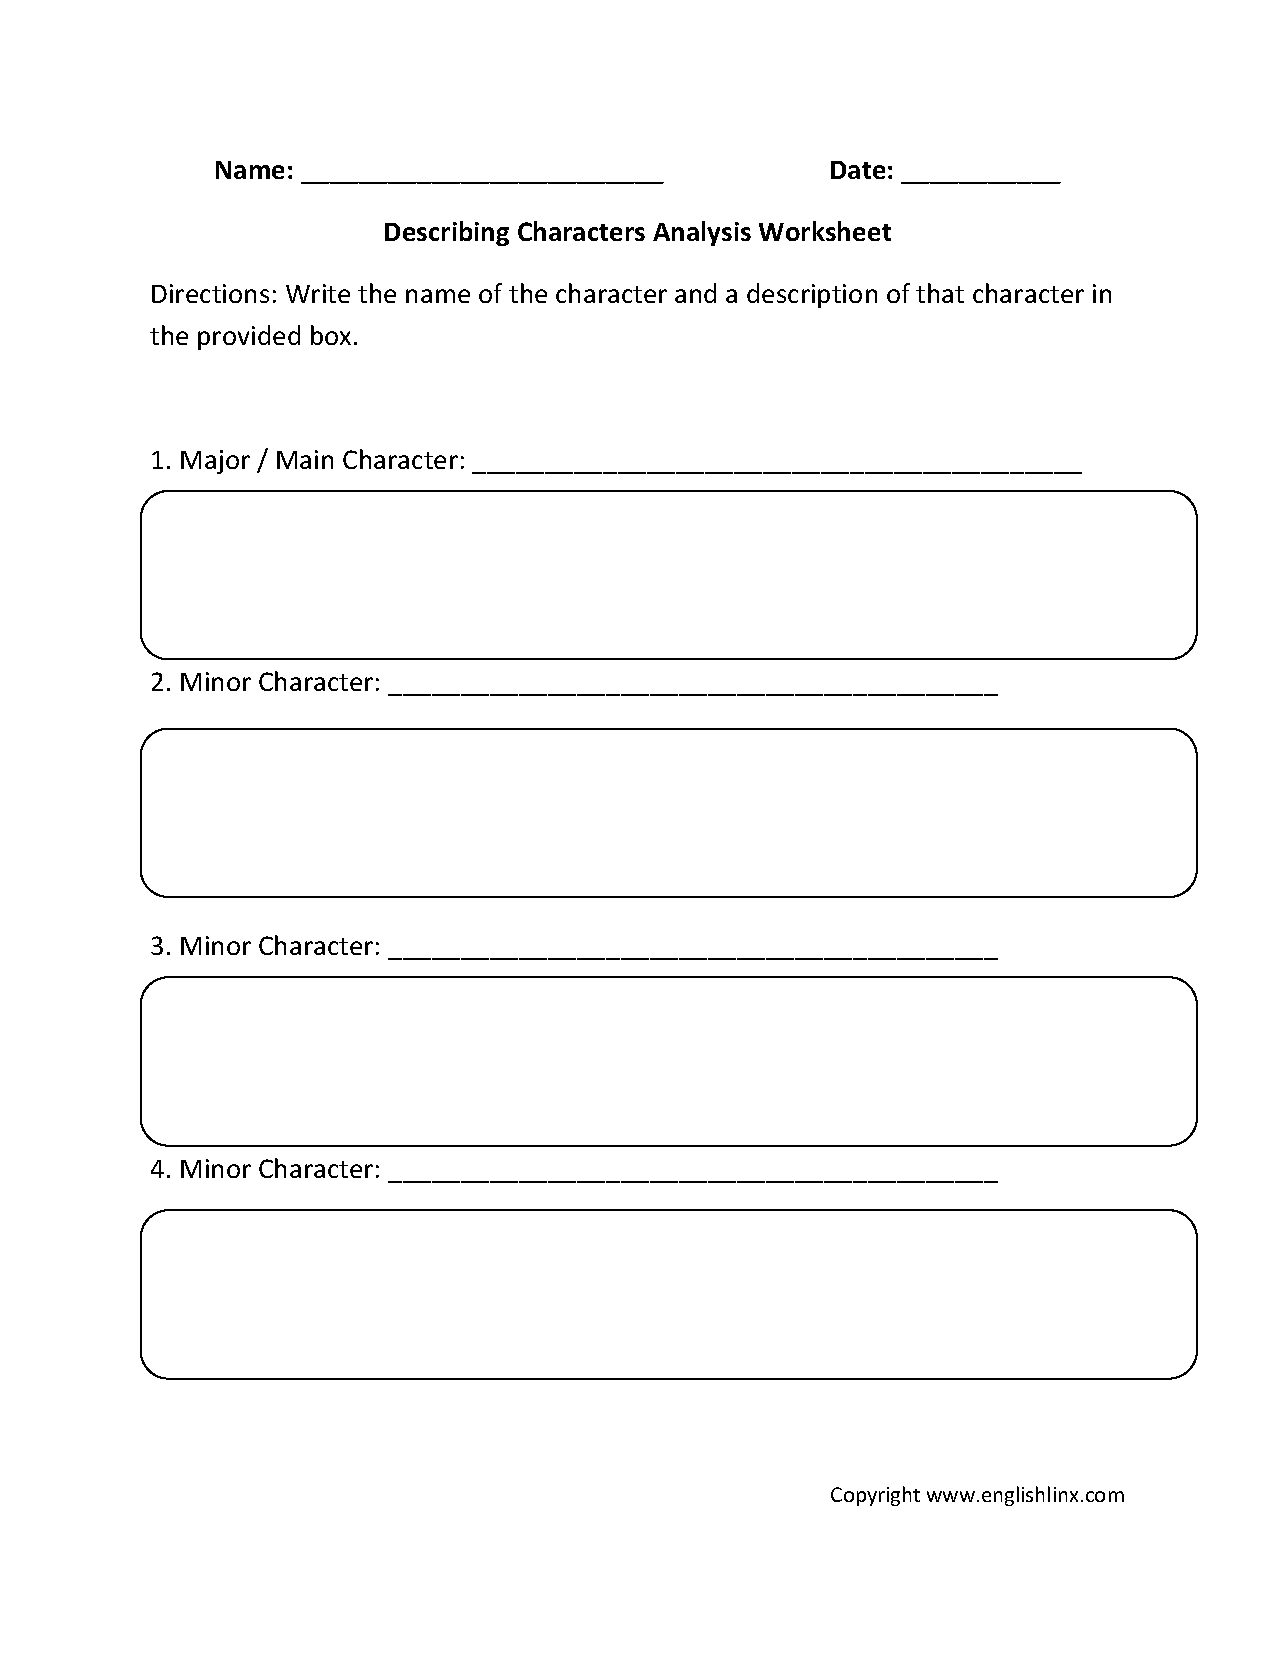 character-analysis-boxes-storyboard-by-worksheet-templates